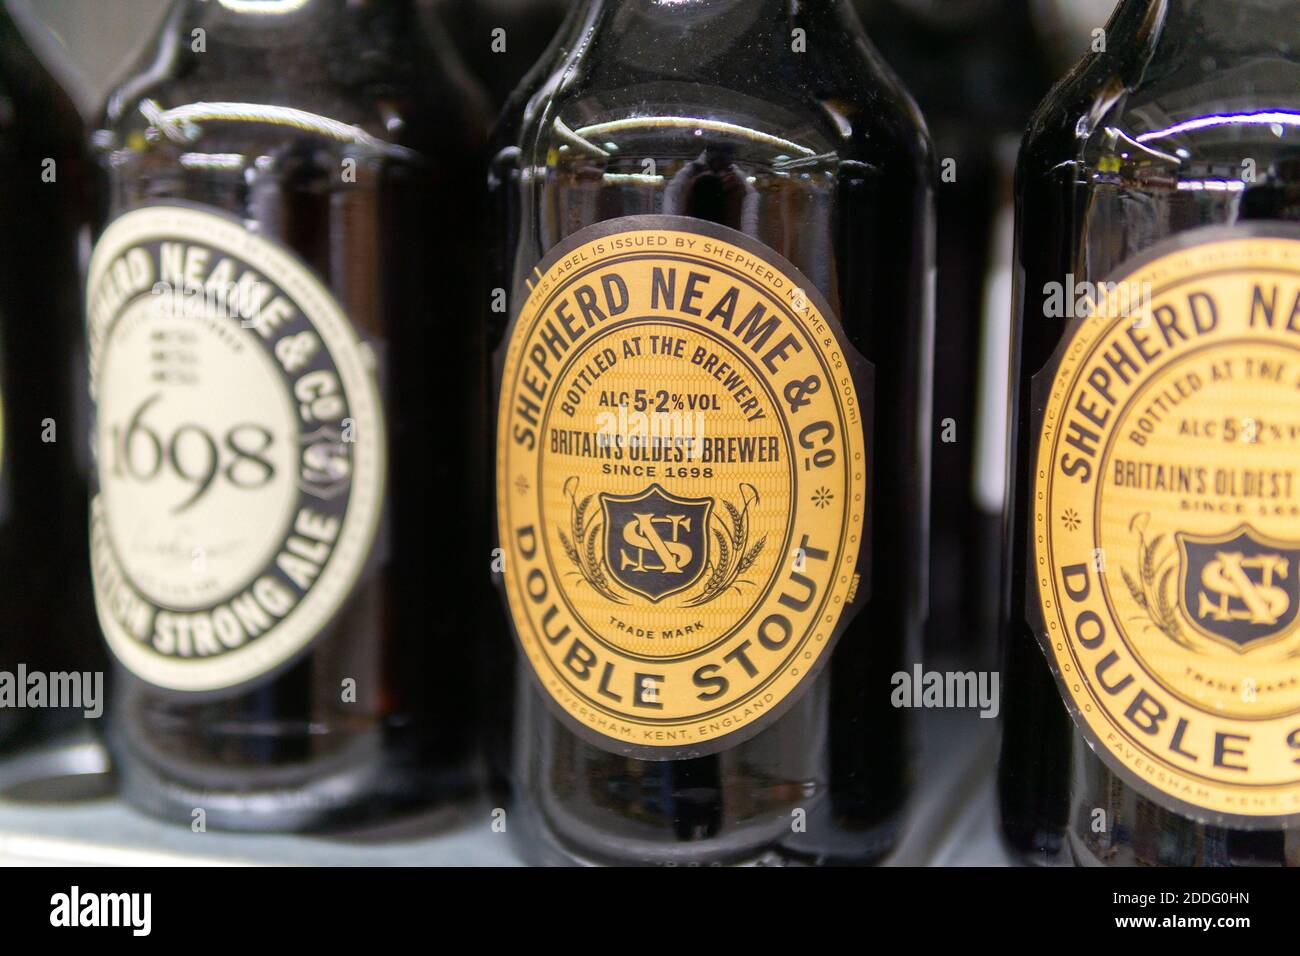 Tyumen, Russia-October 11, 2020: shepherd neame beer is an English independent brewery. Bottles of beer on the shelves of the metro cash and carry hyp Stock Photo